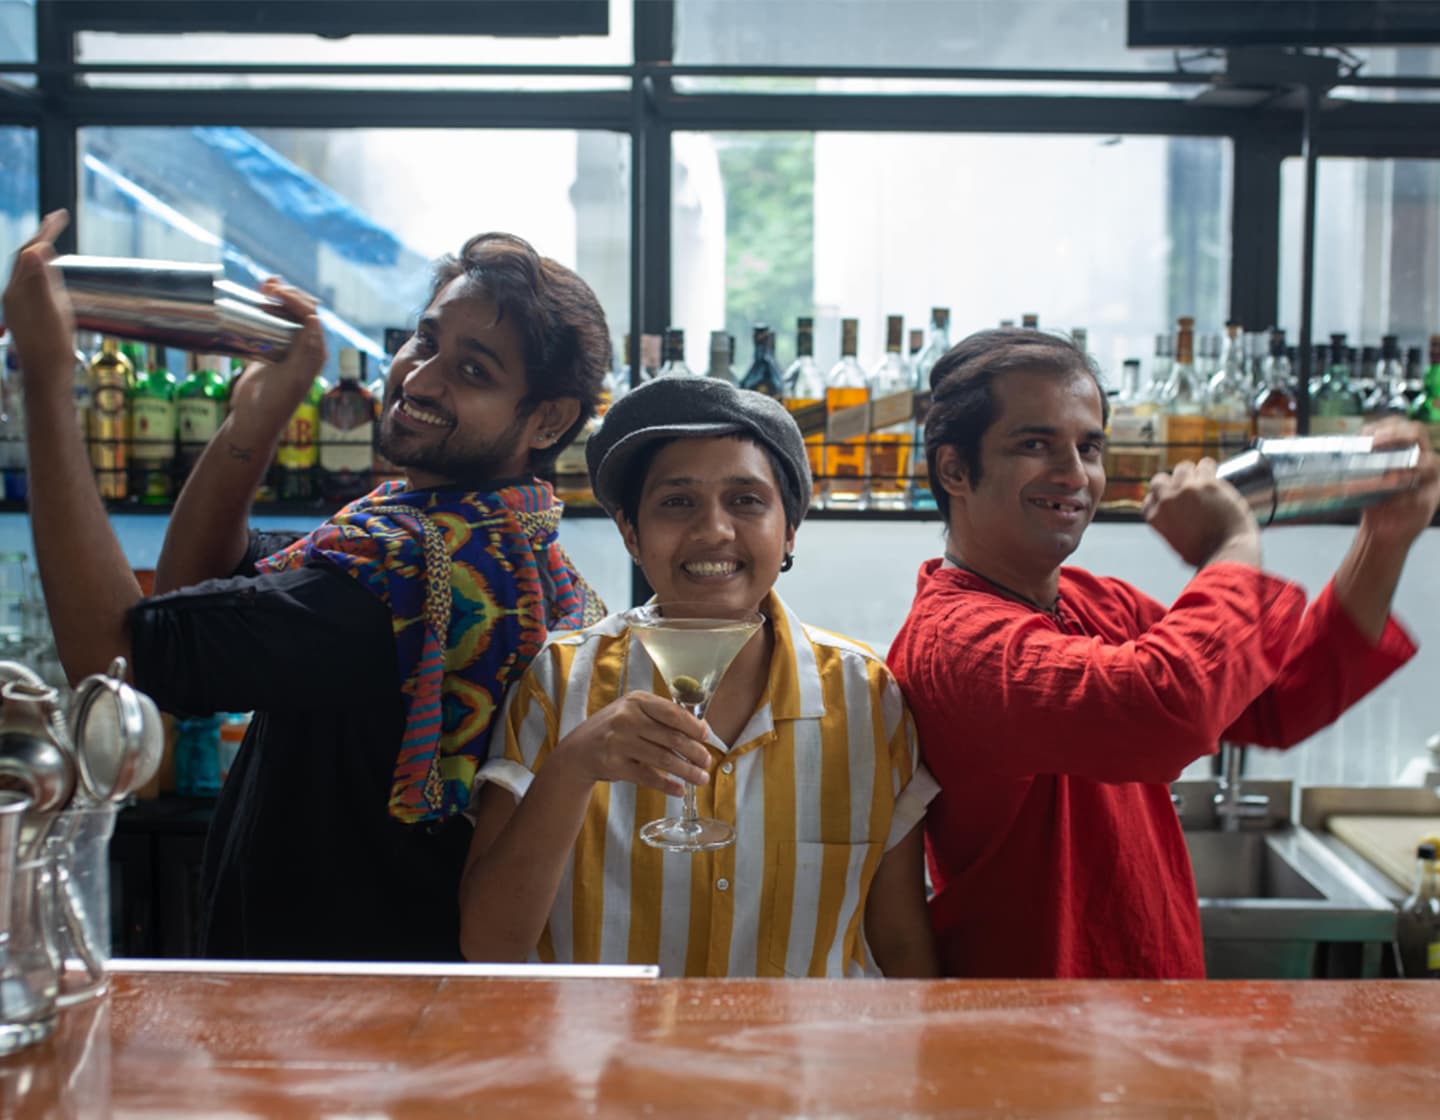 Three bartenders posed together, those on the outside holding cocktail shakers and smiling at the camera. The one in the middle lifting a cocktail glass and smiling at the camera. 